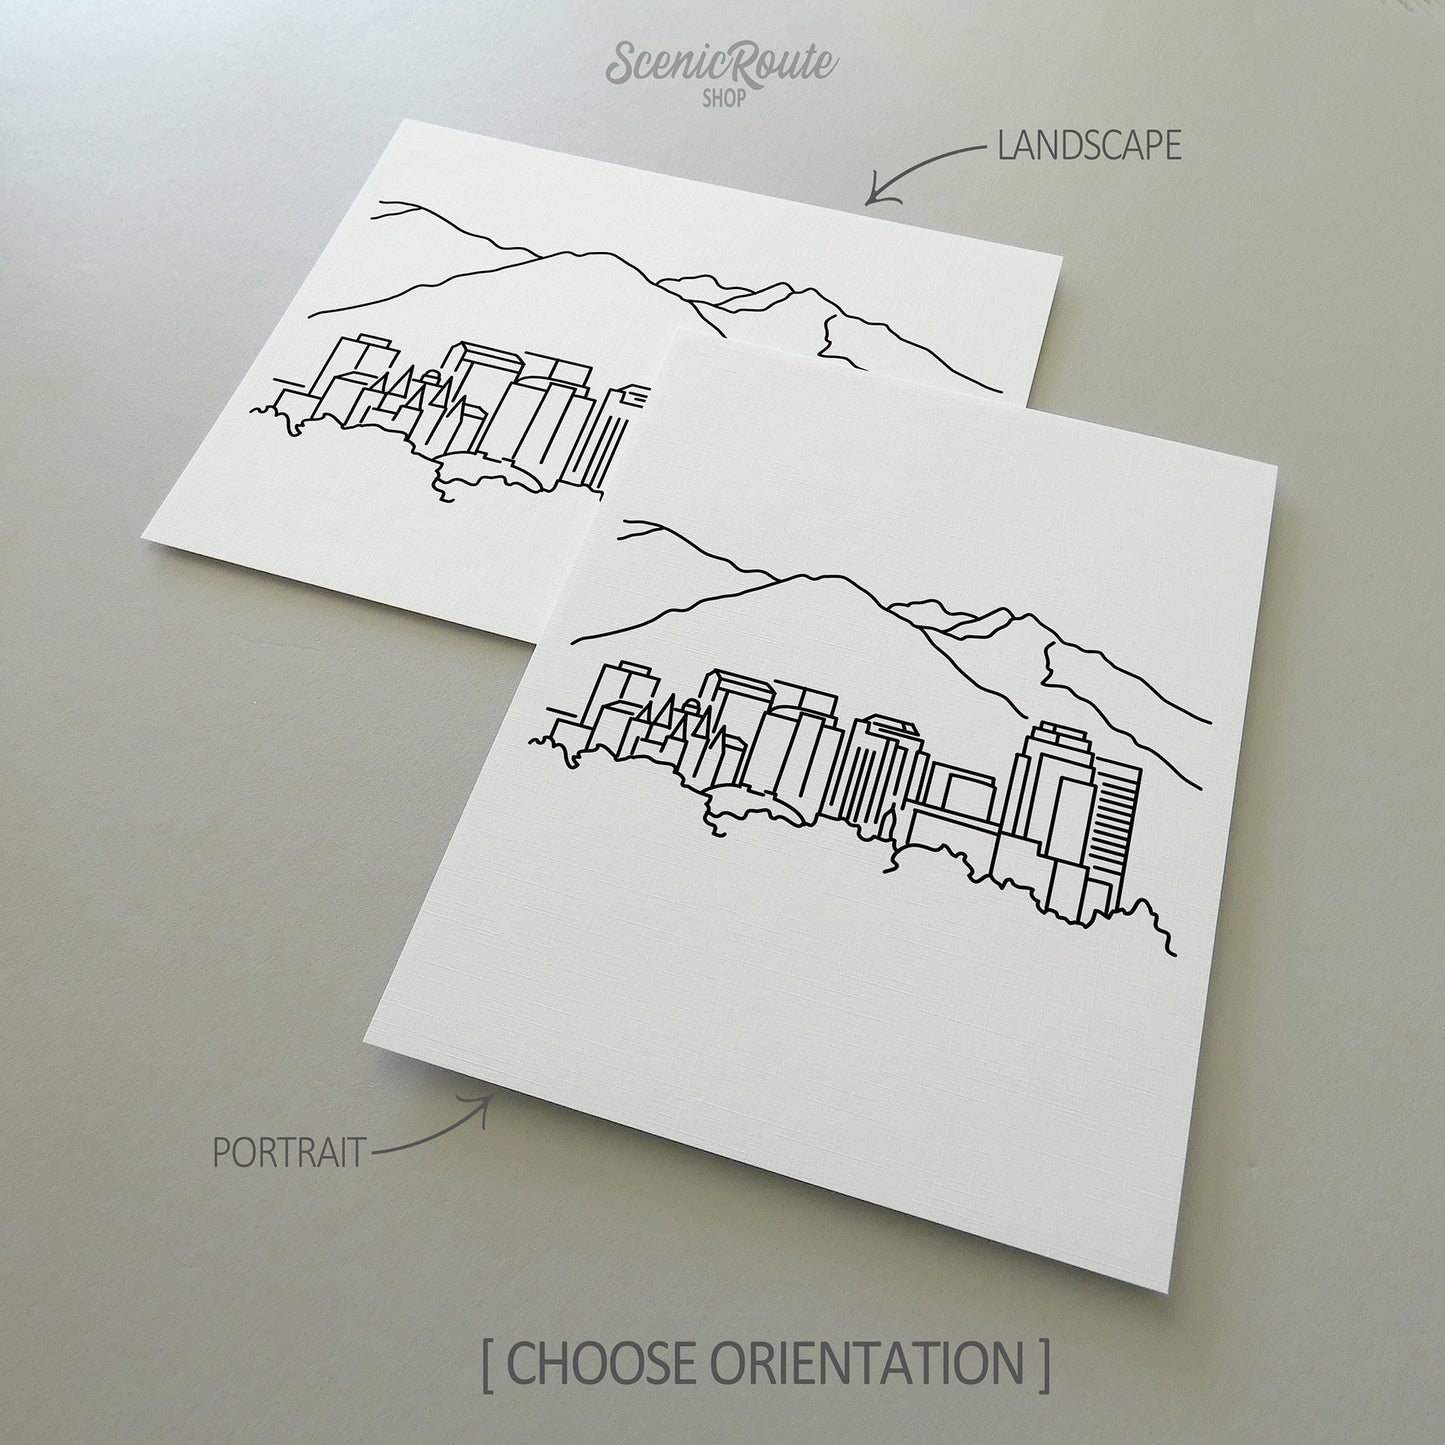 Two line art drawings of the Salt Lake City Skyline on white linen paper with a gray background.  The pieces are shown in portrait and landscape orientation for the available art print options.